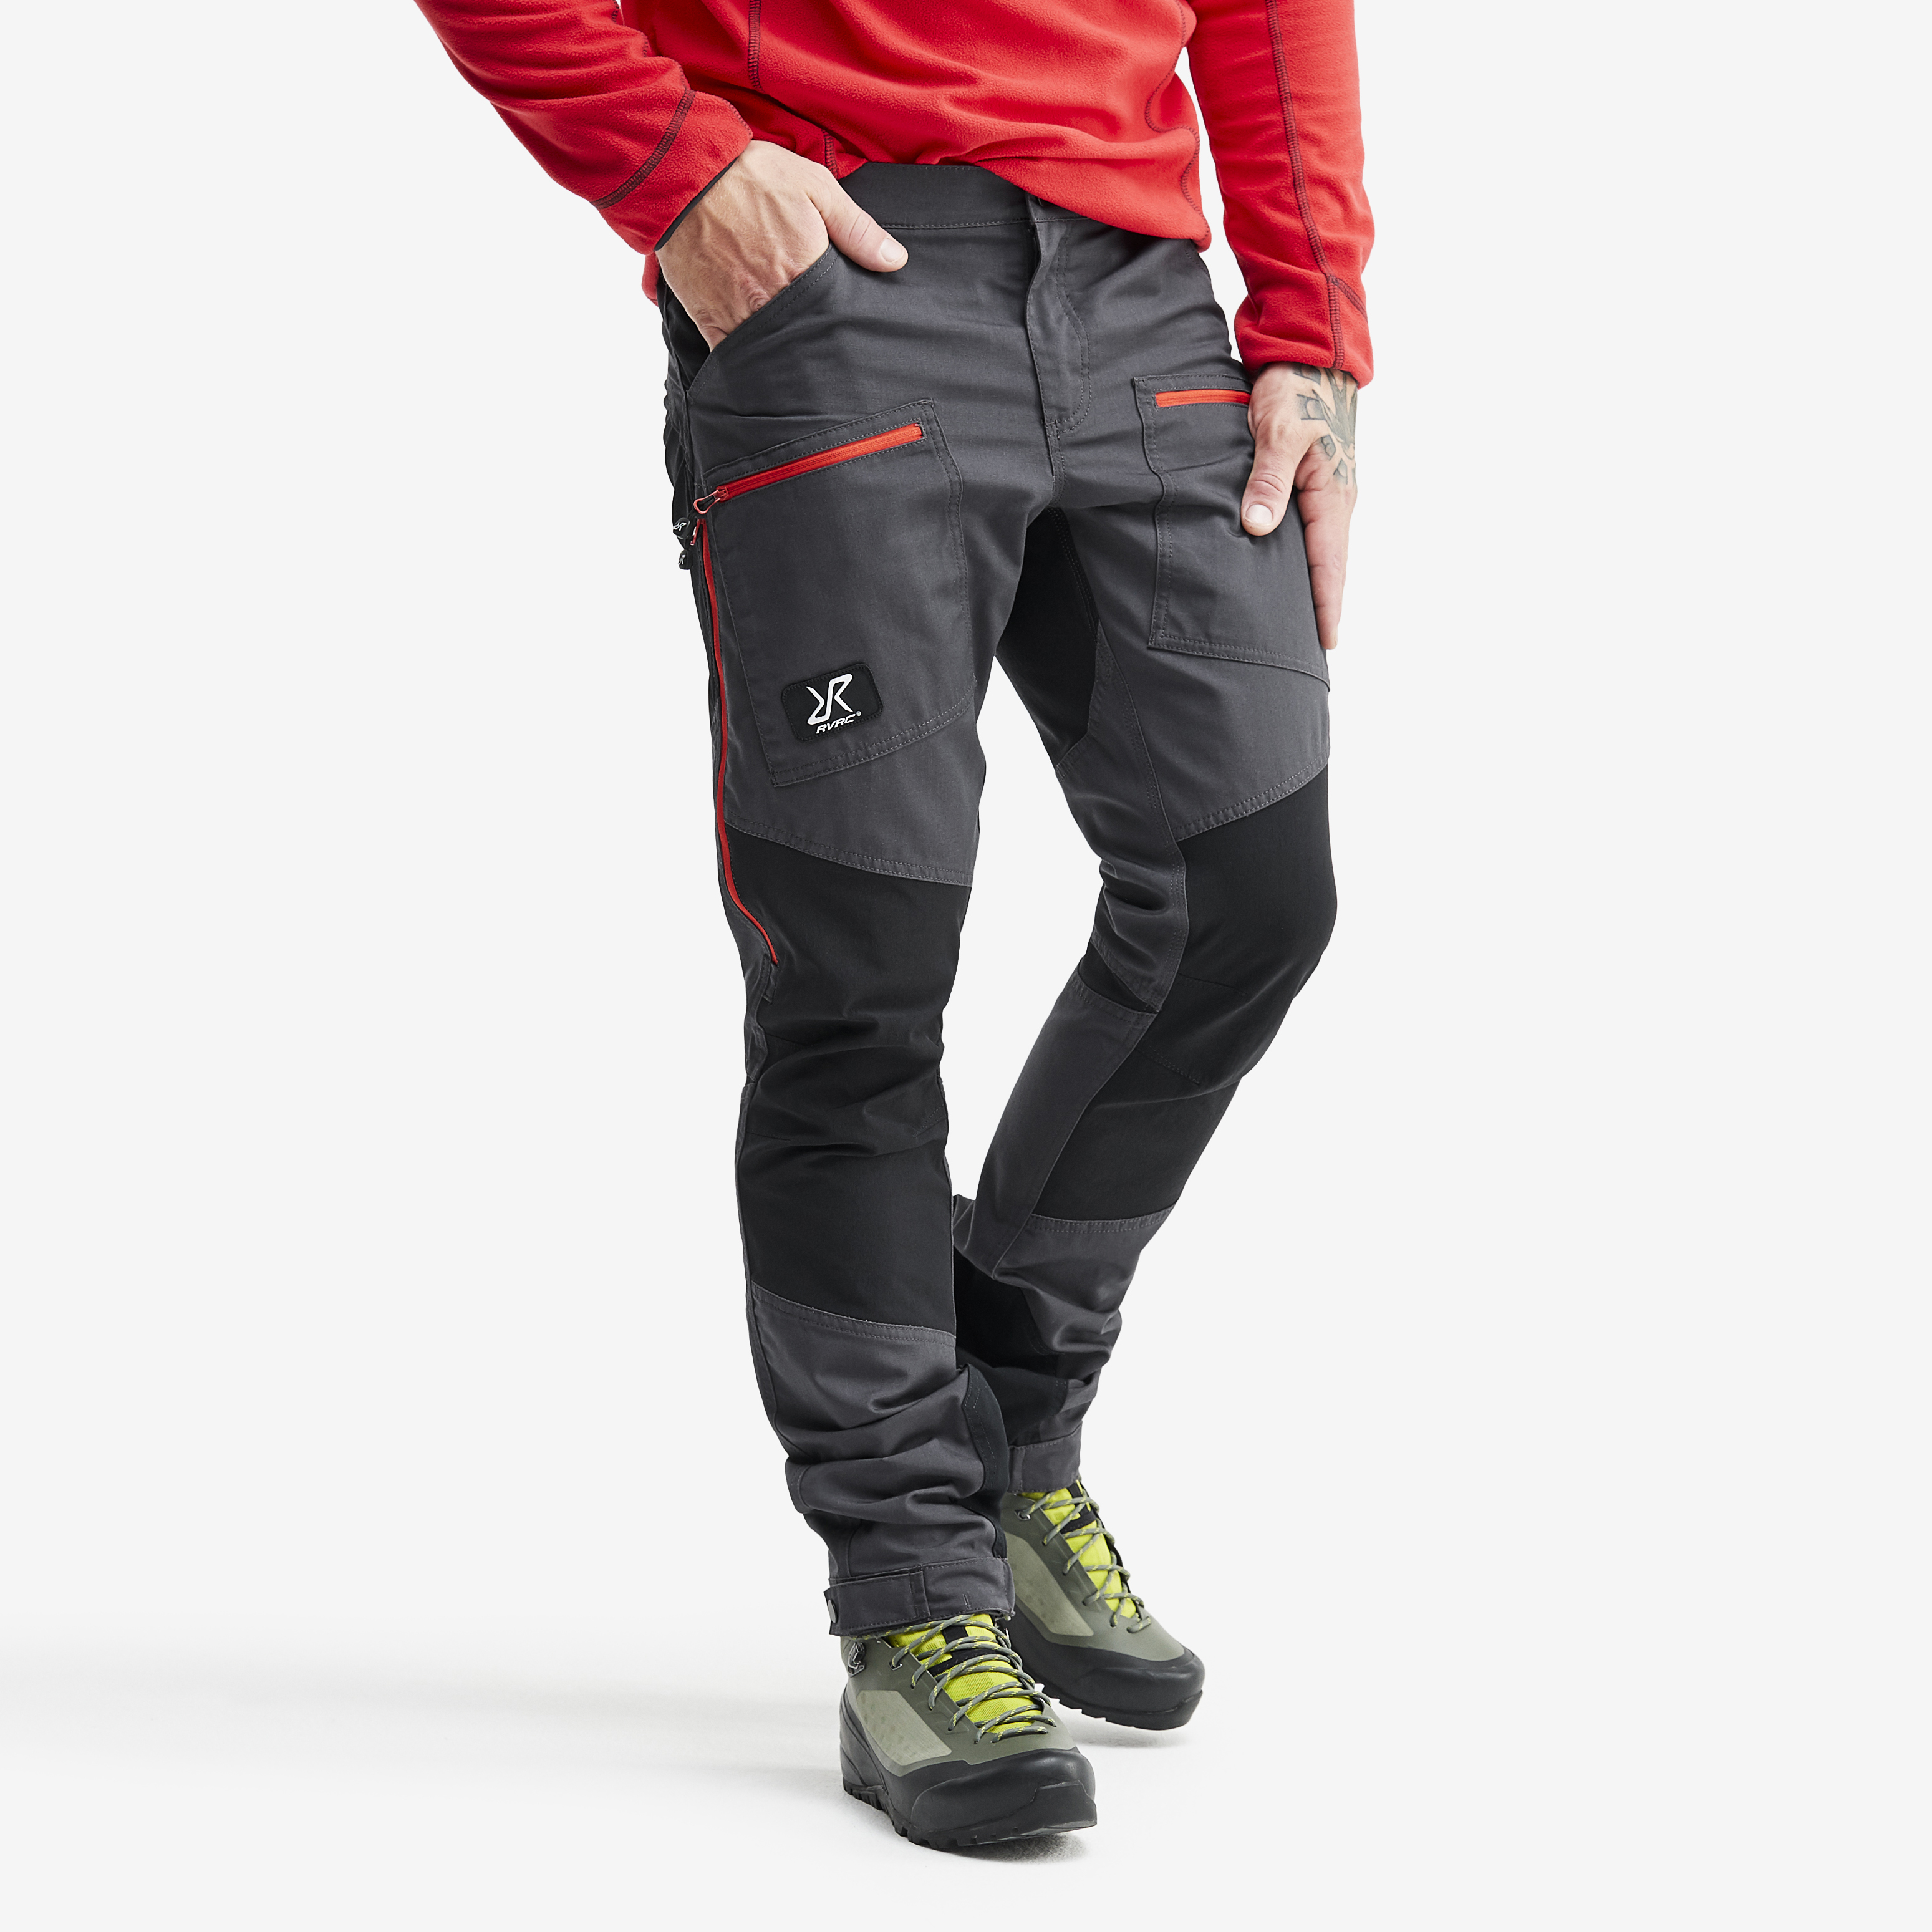 Nordwand Pro Pants Gunmetal/Red Homme